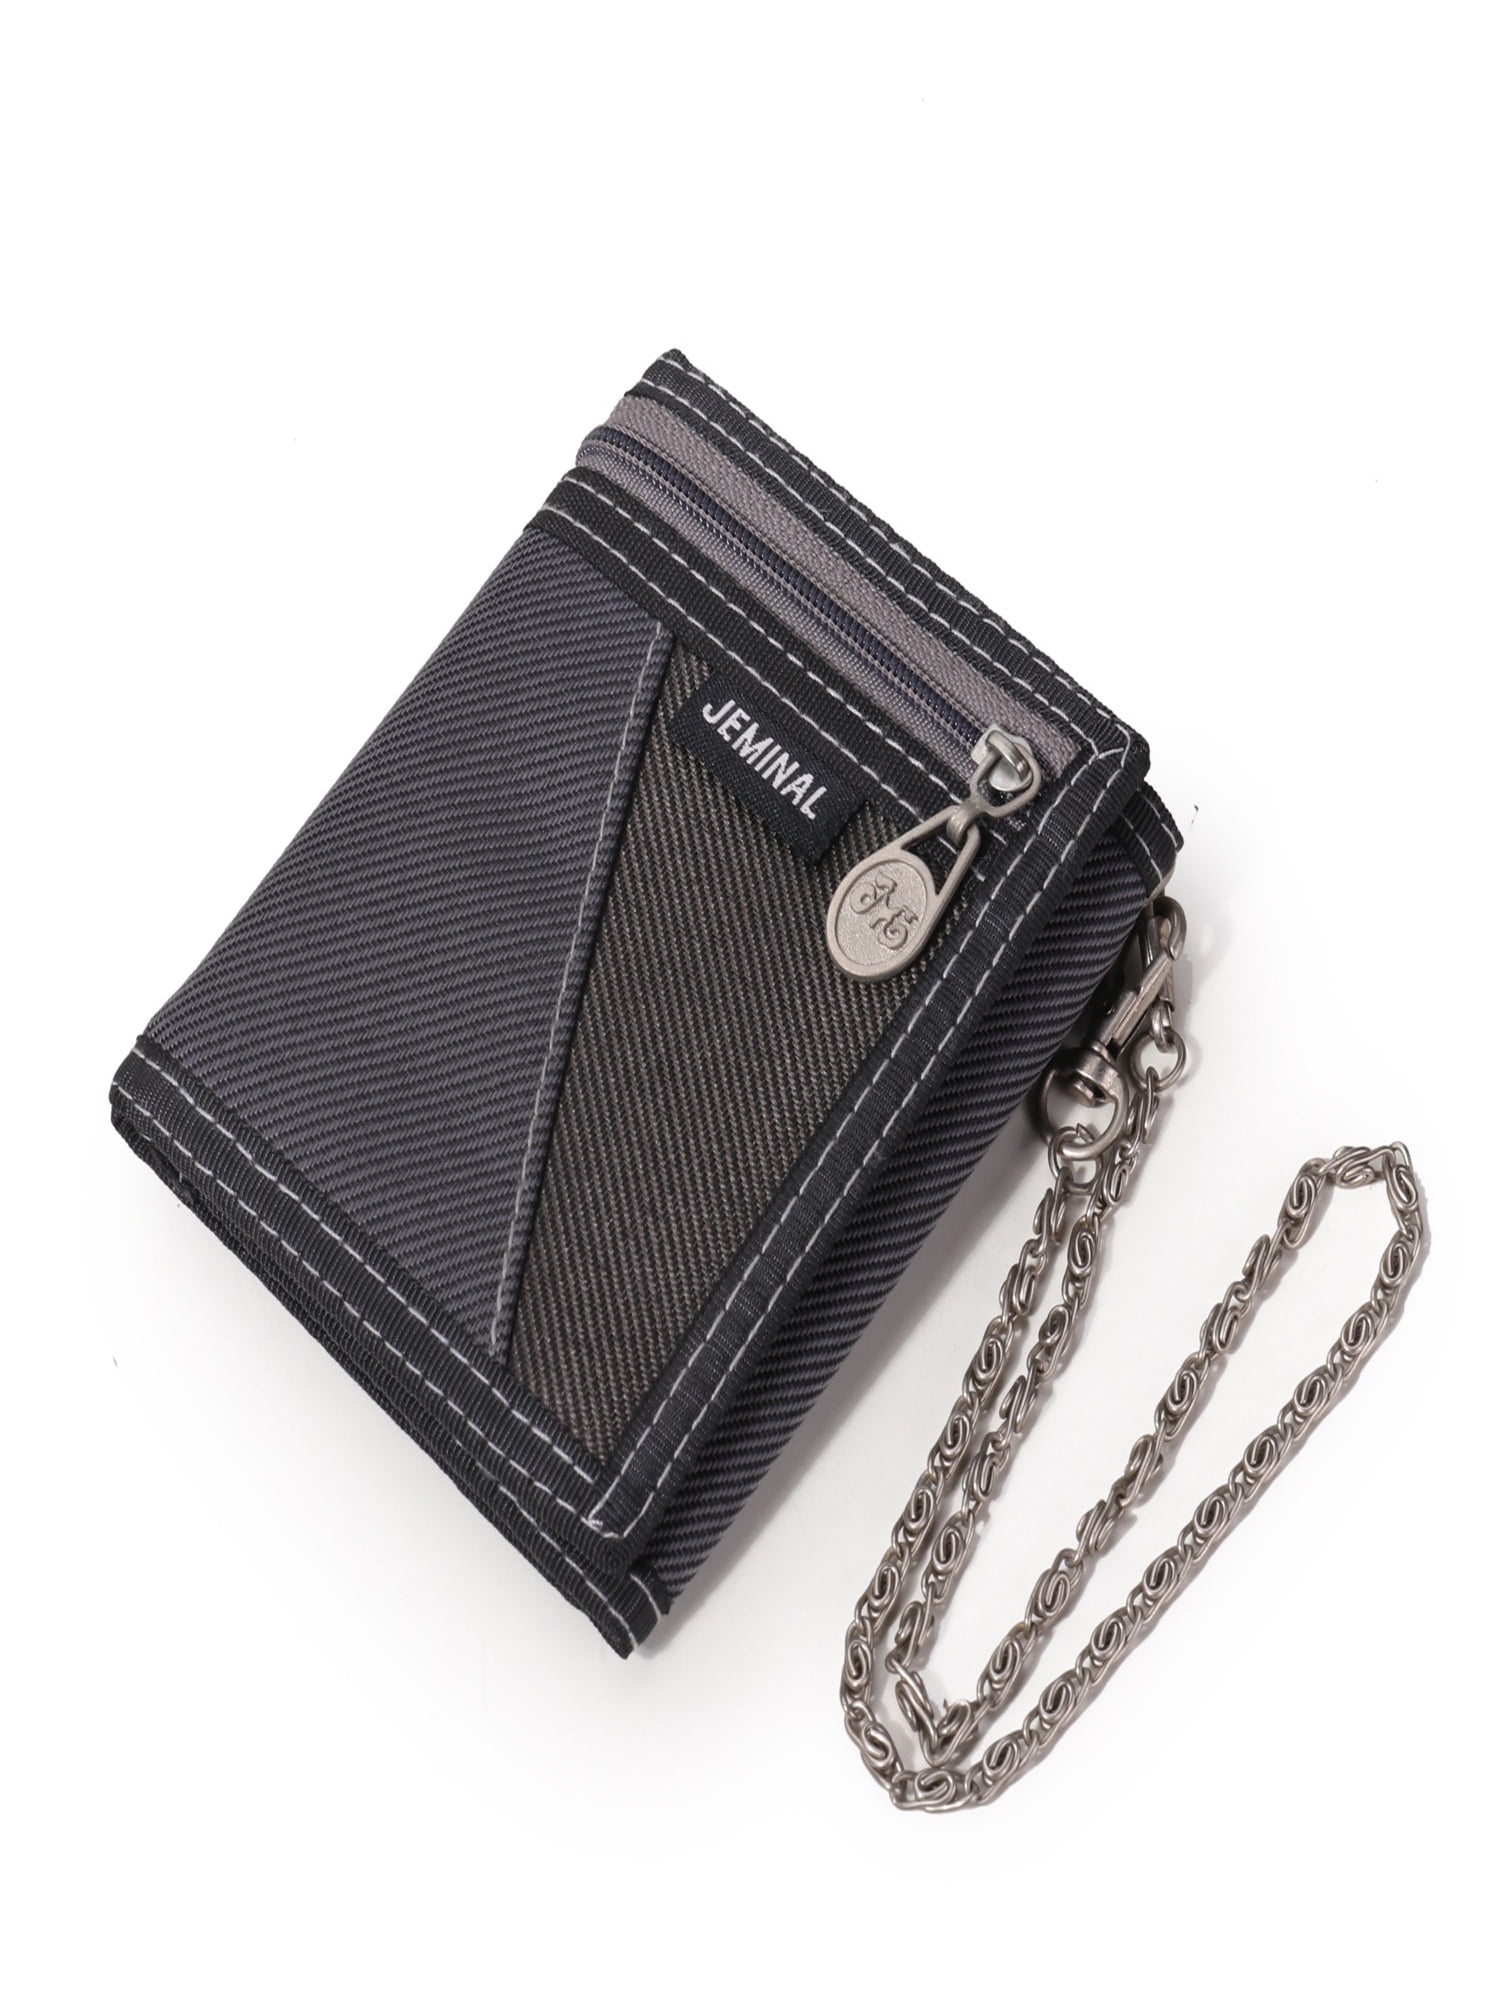 Casual men's canvas wallet Personalized short card holder Fashion